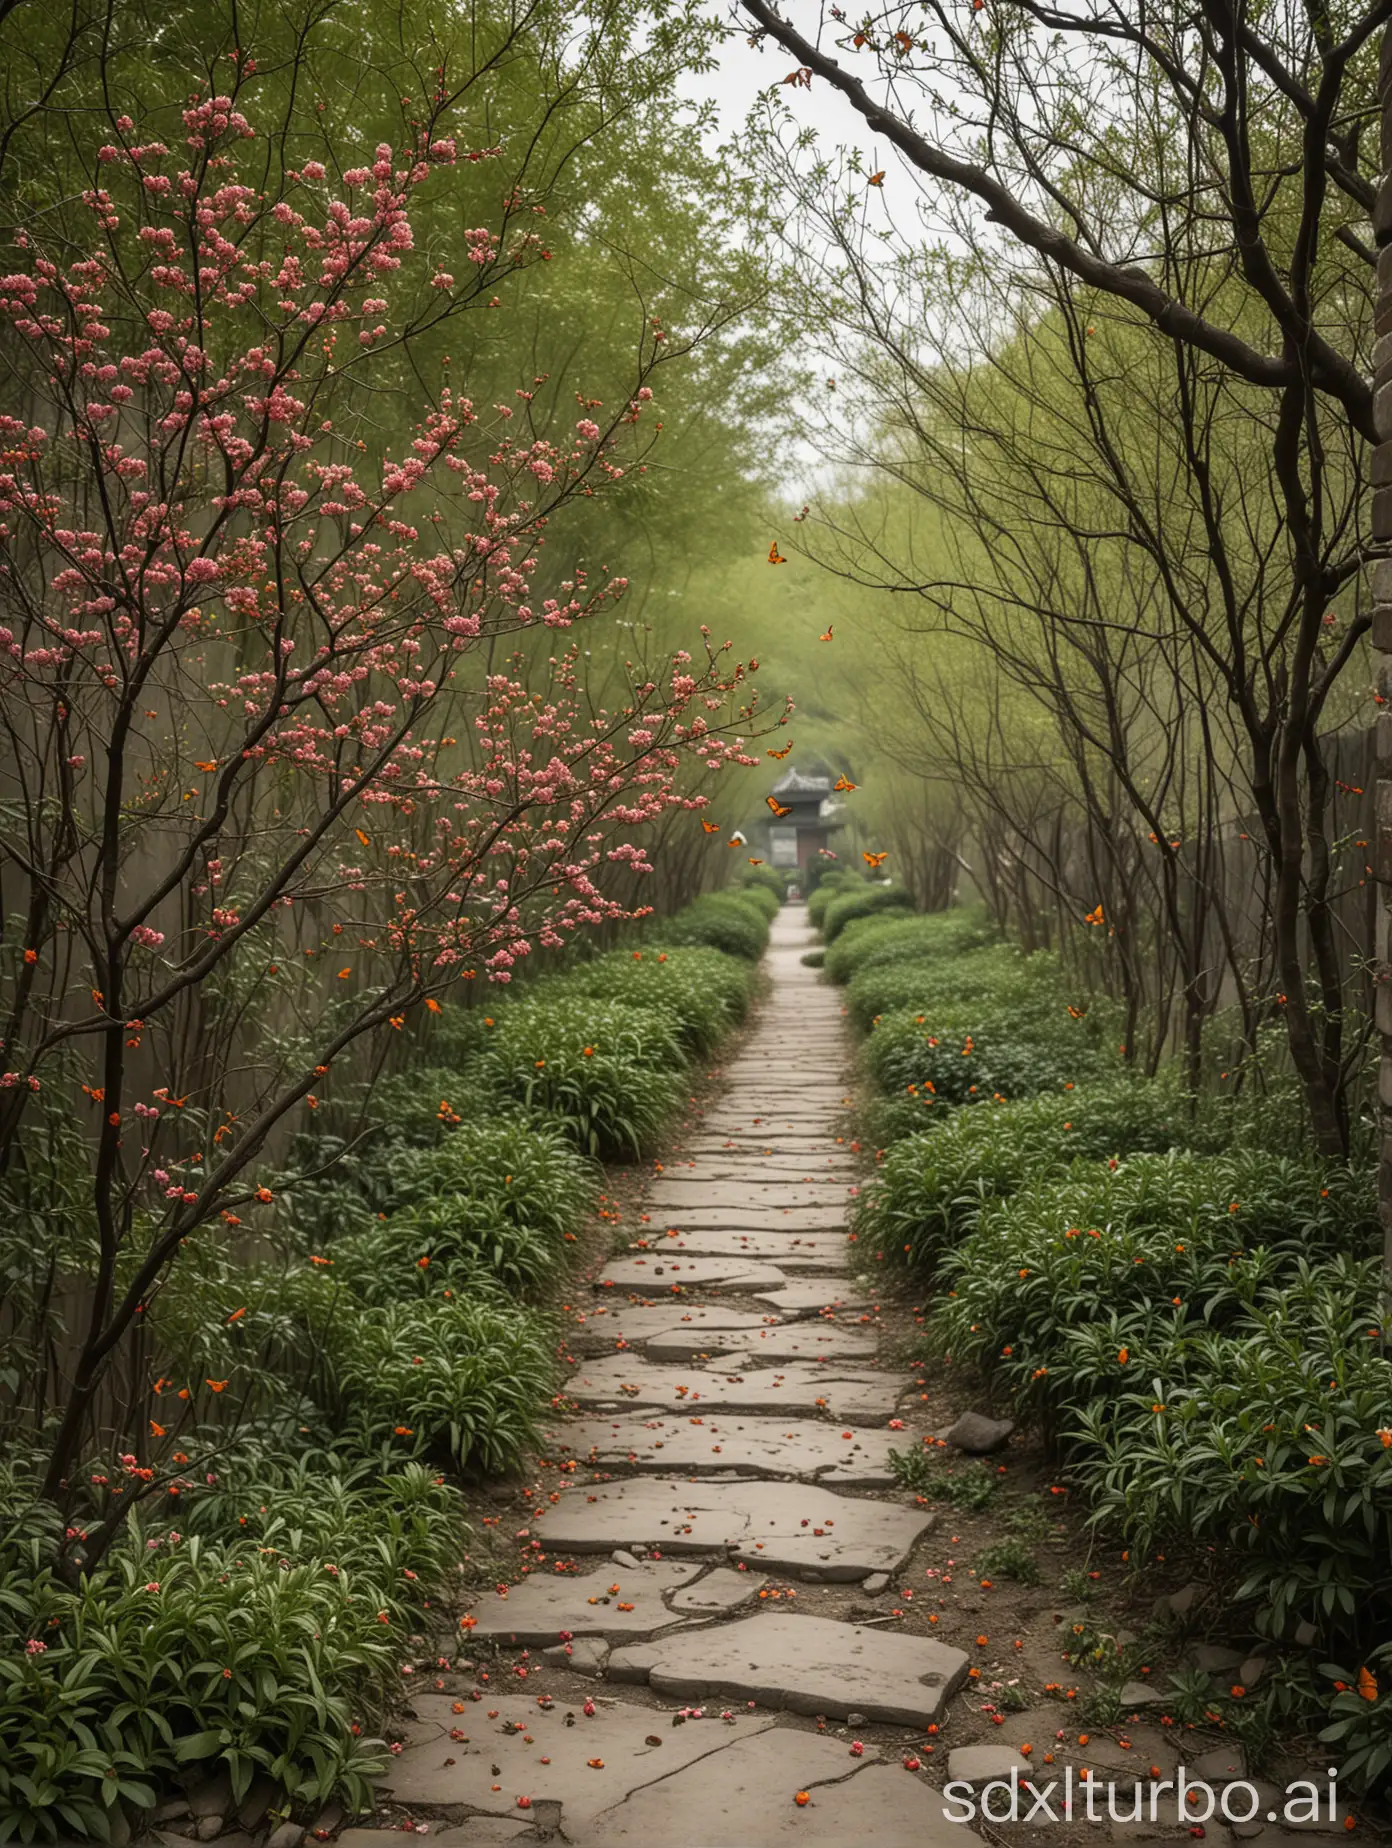 In Huang Siniang's home, the flowers fill the paths, with thousands of buds pressing low on the branches. The lingering butterflies dance from time to time, while the carefree Orioles sing just right.